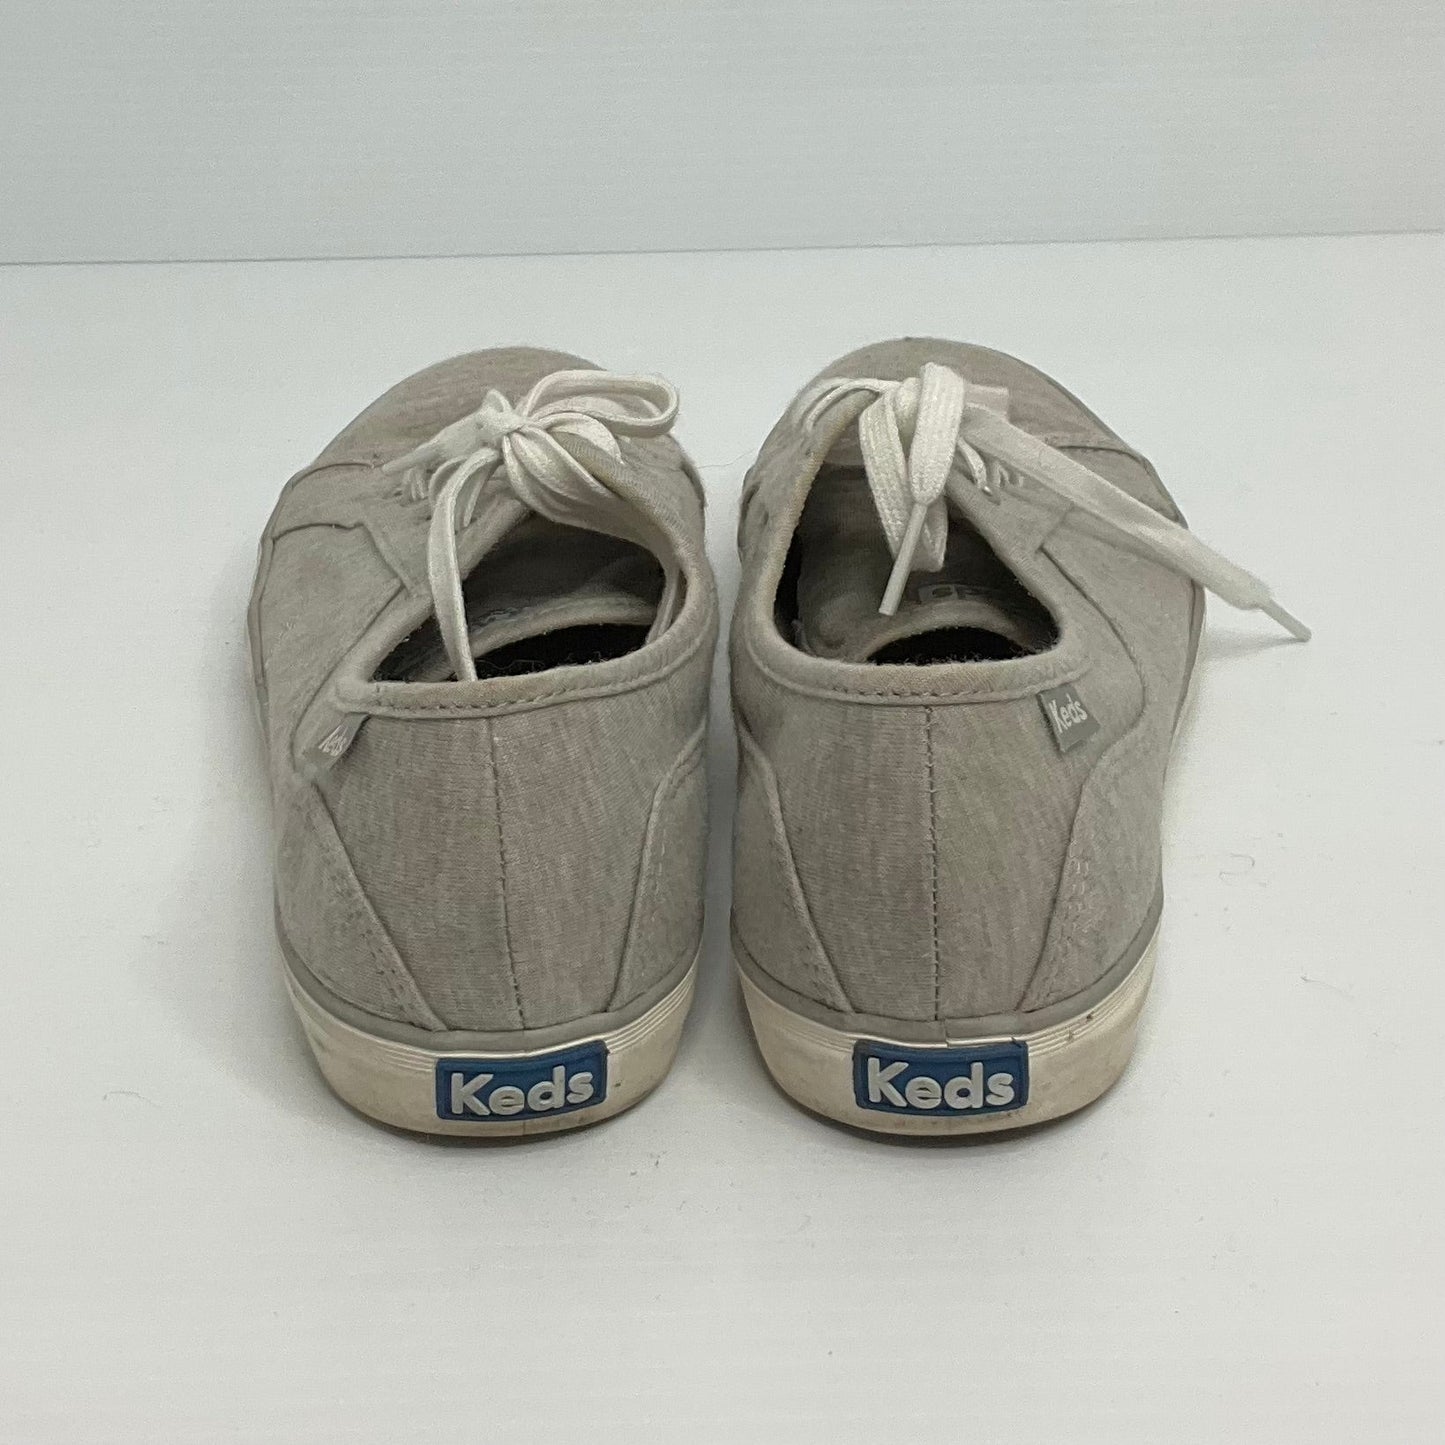 Grey Shoes Sneakers Keds, Size 8.5